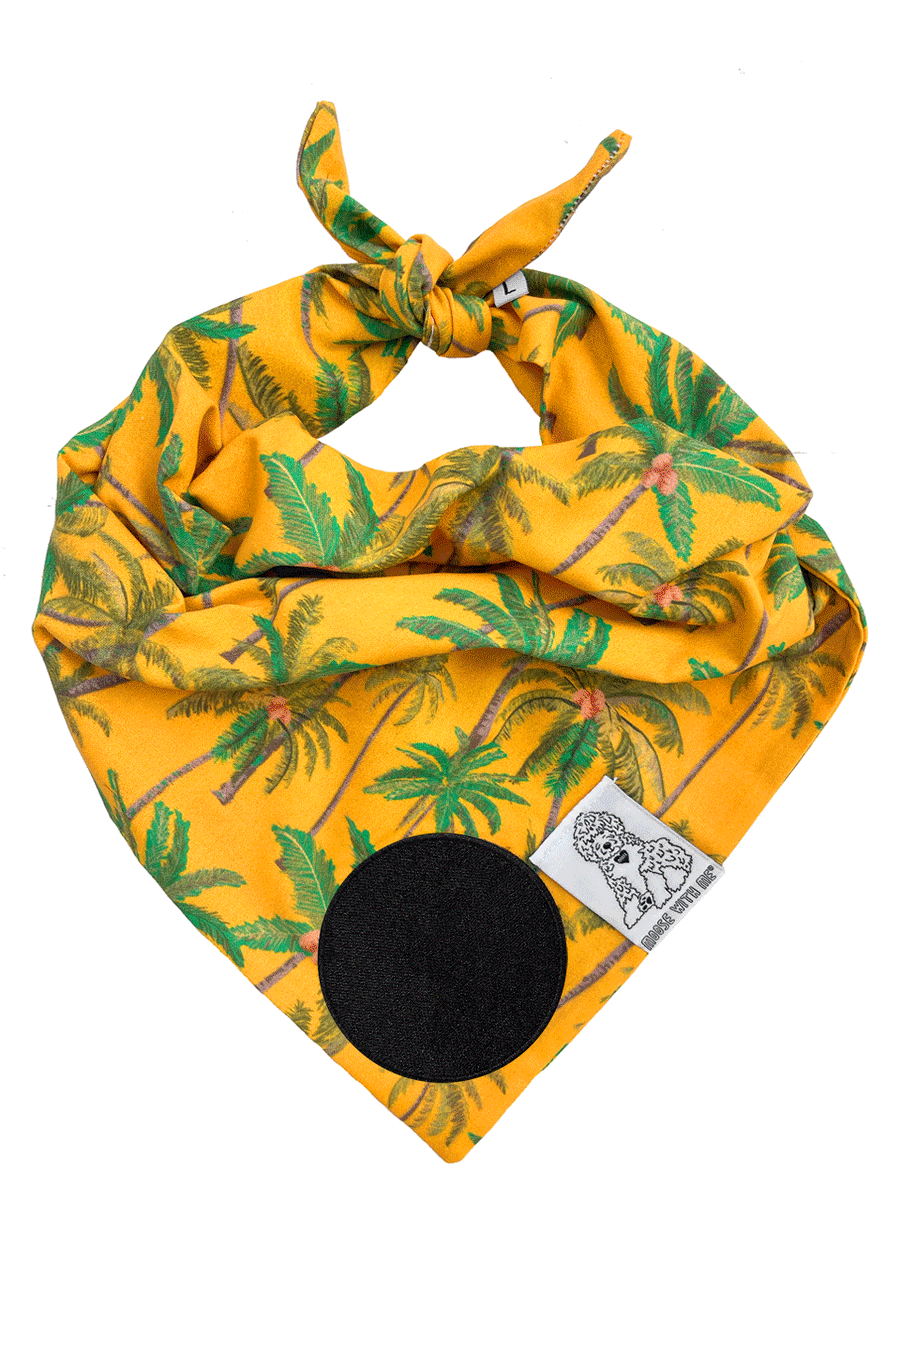 Dog Bandana Palm Tree - Customize with Interchangeable Velcro Patches